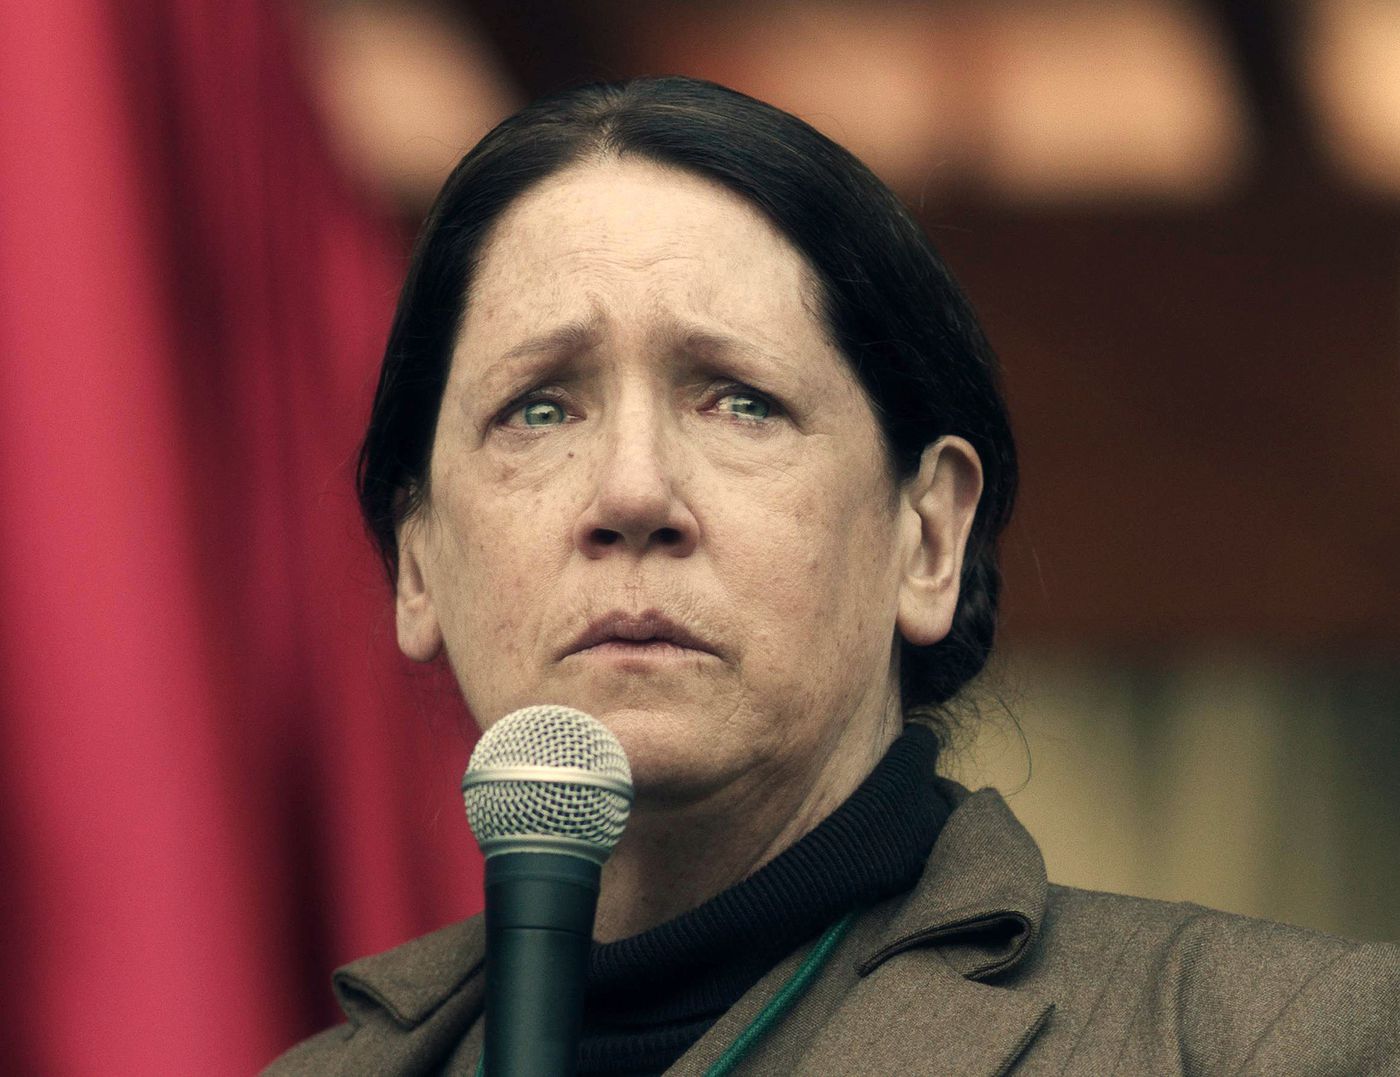 Dowd admits she fights to understand her ‘Handmaid’s Tale’ character, Aunt Lydia